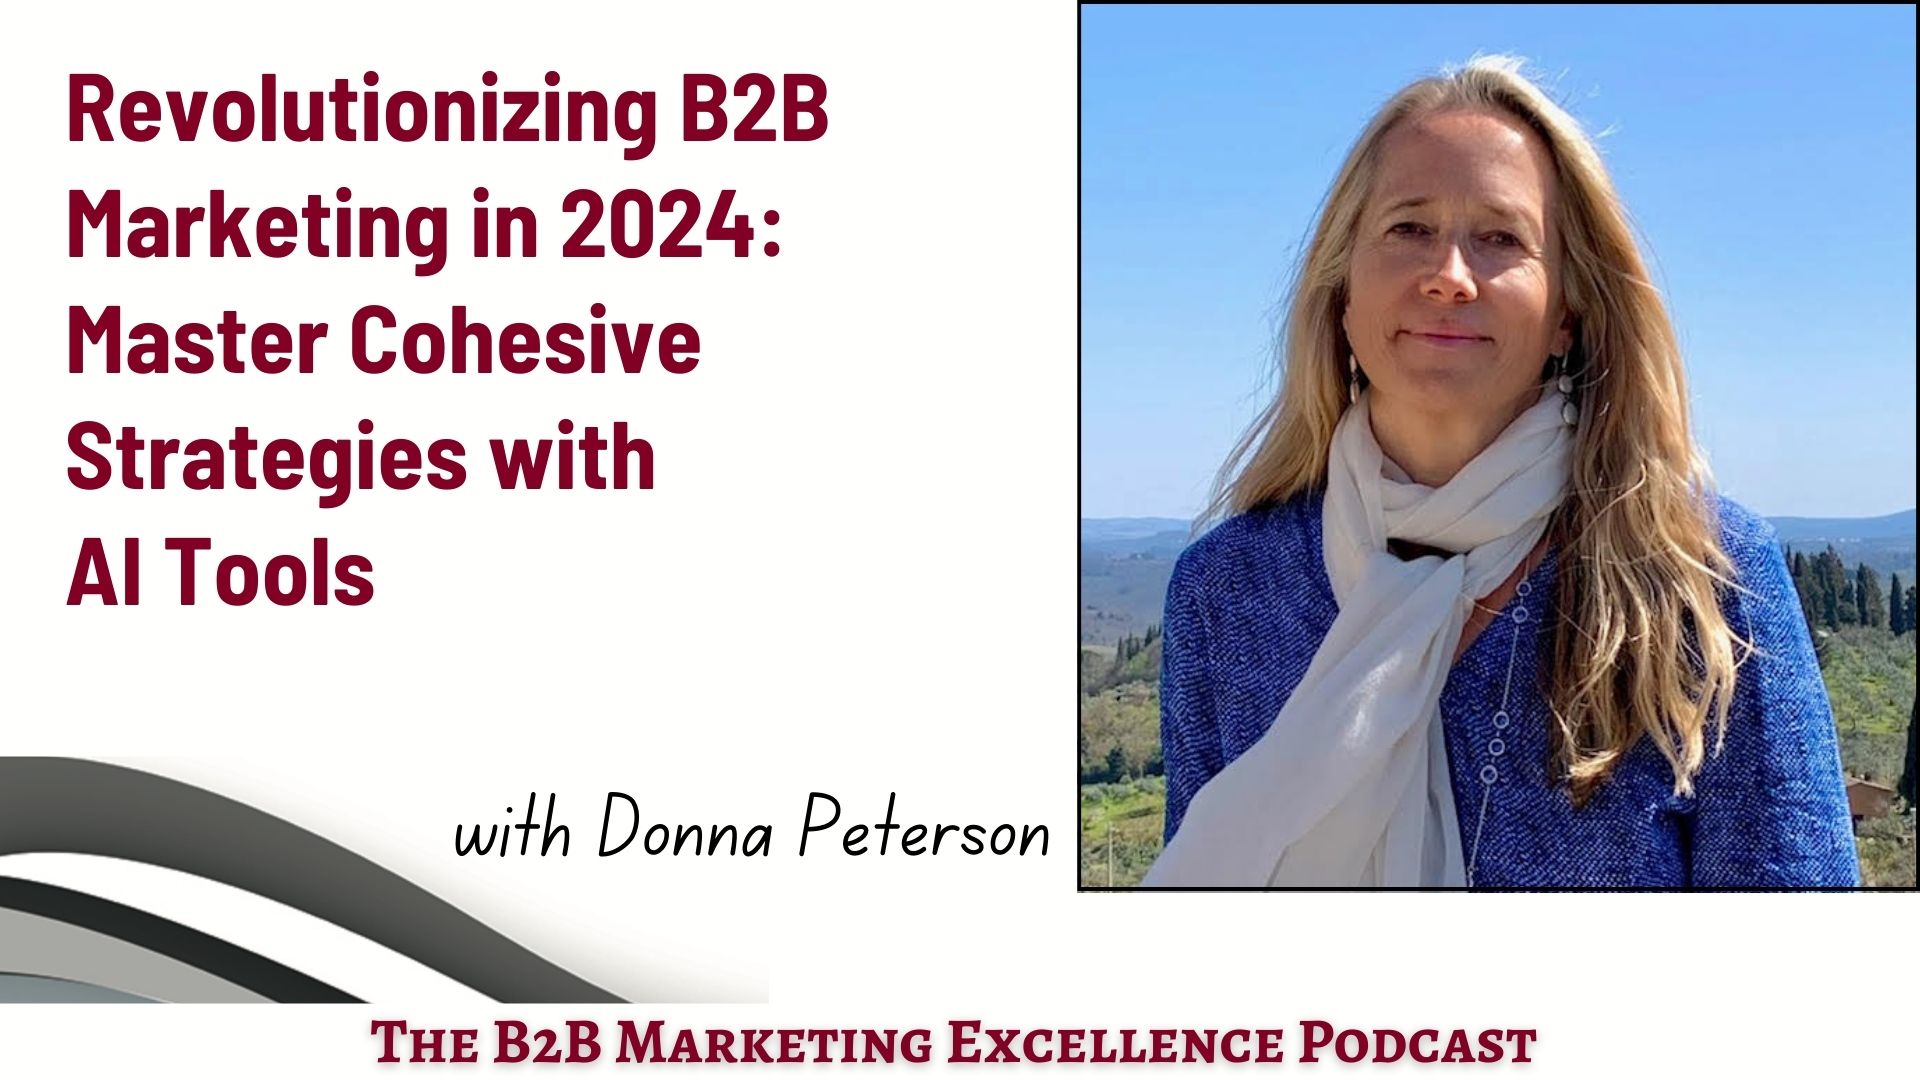 Revolutionizing B2B Marketing in 2024 Master Cohesive Strategies with AI Tools